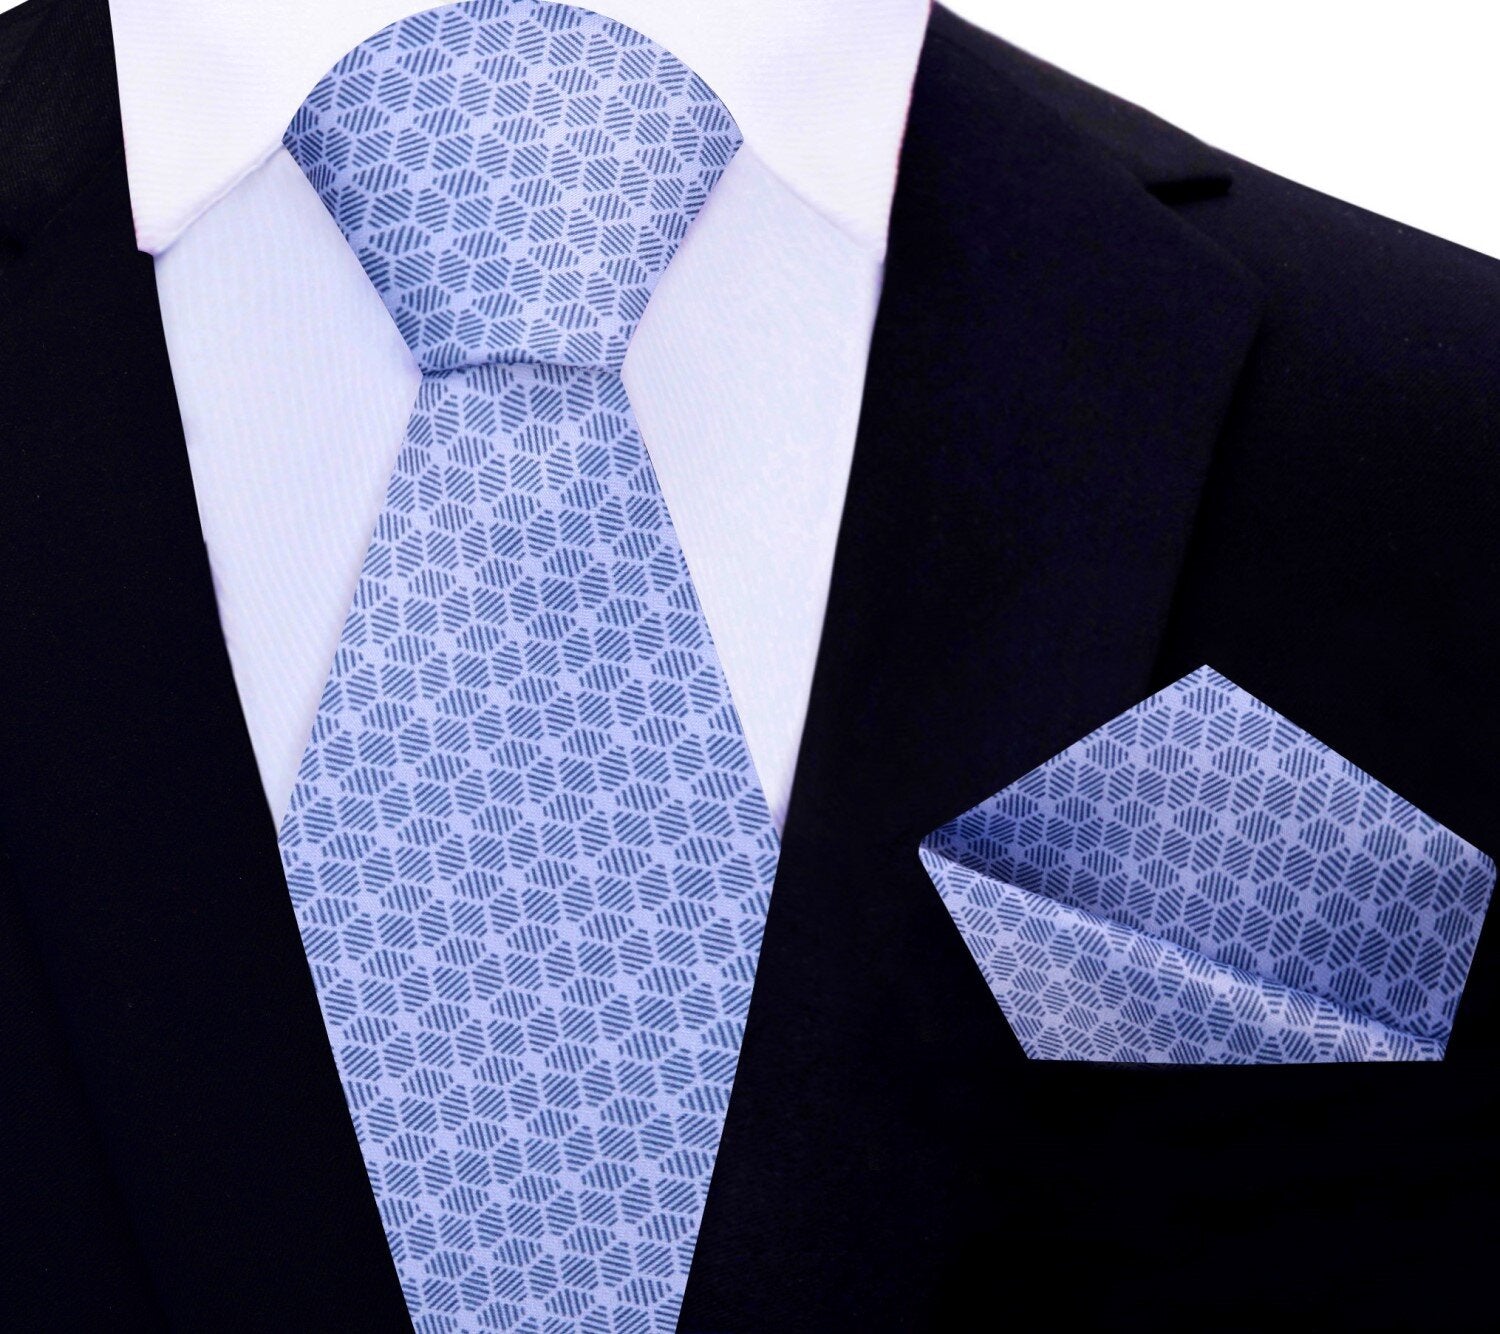 Main View: Deep Periwinkle, Blue 3D Cubes Tie and Pocket Square